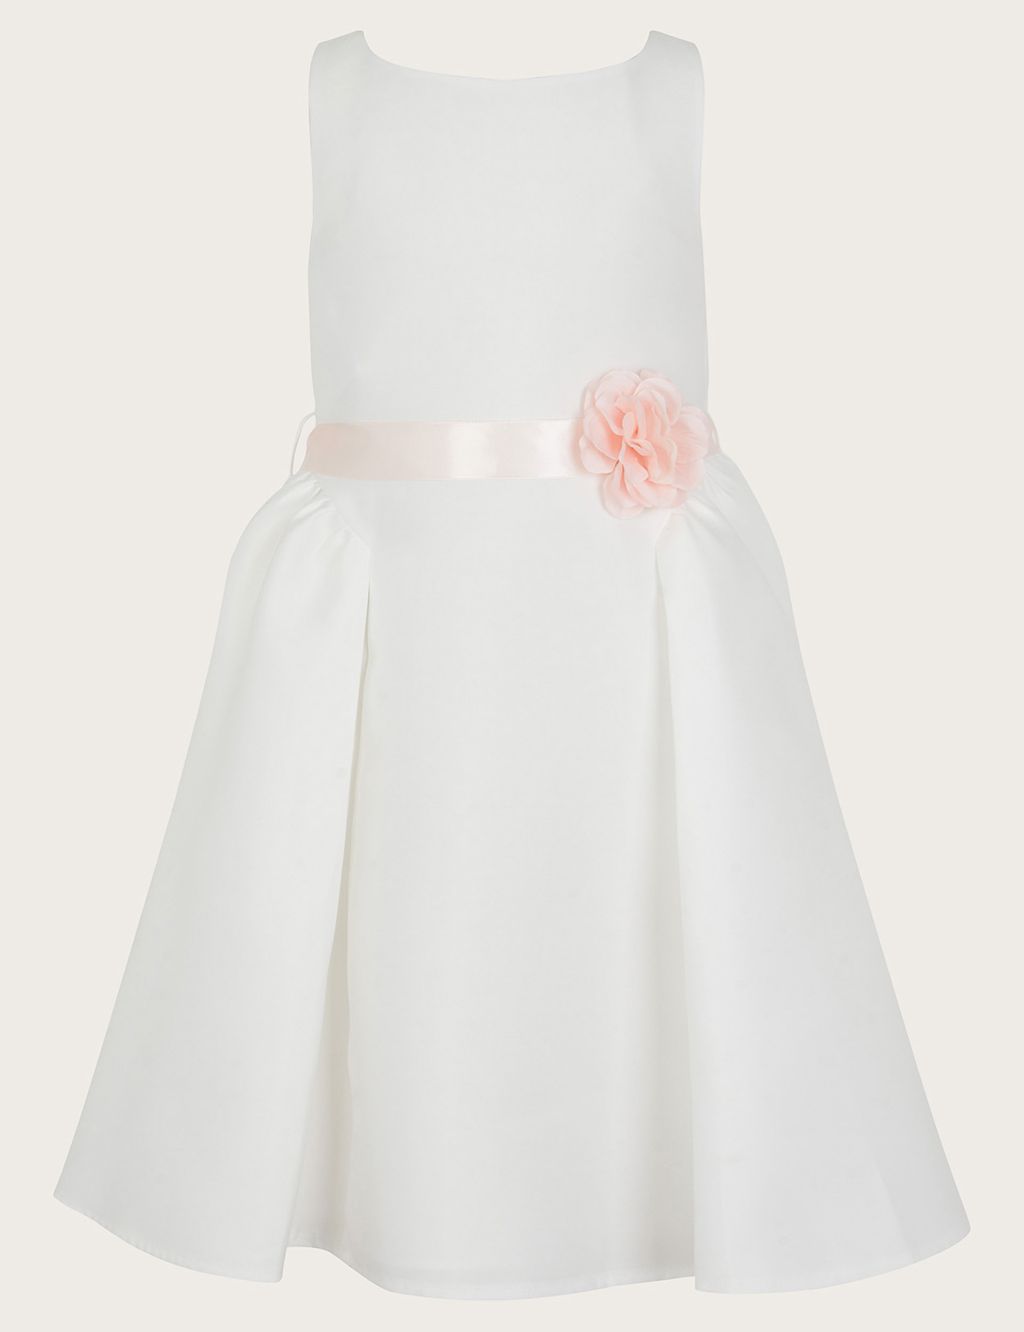 Bow Detail Occasion Dress (3-13 Yrs) image 1